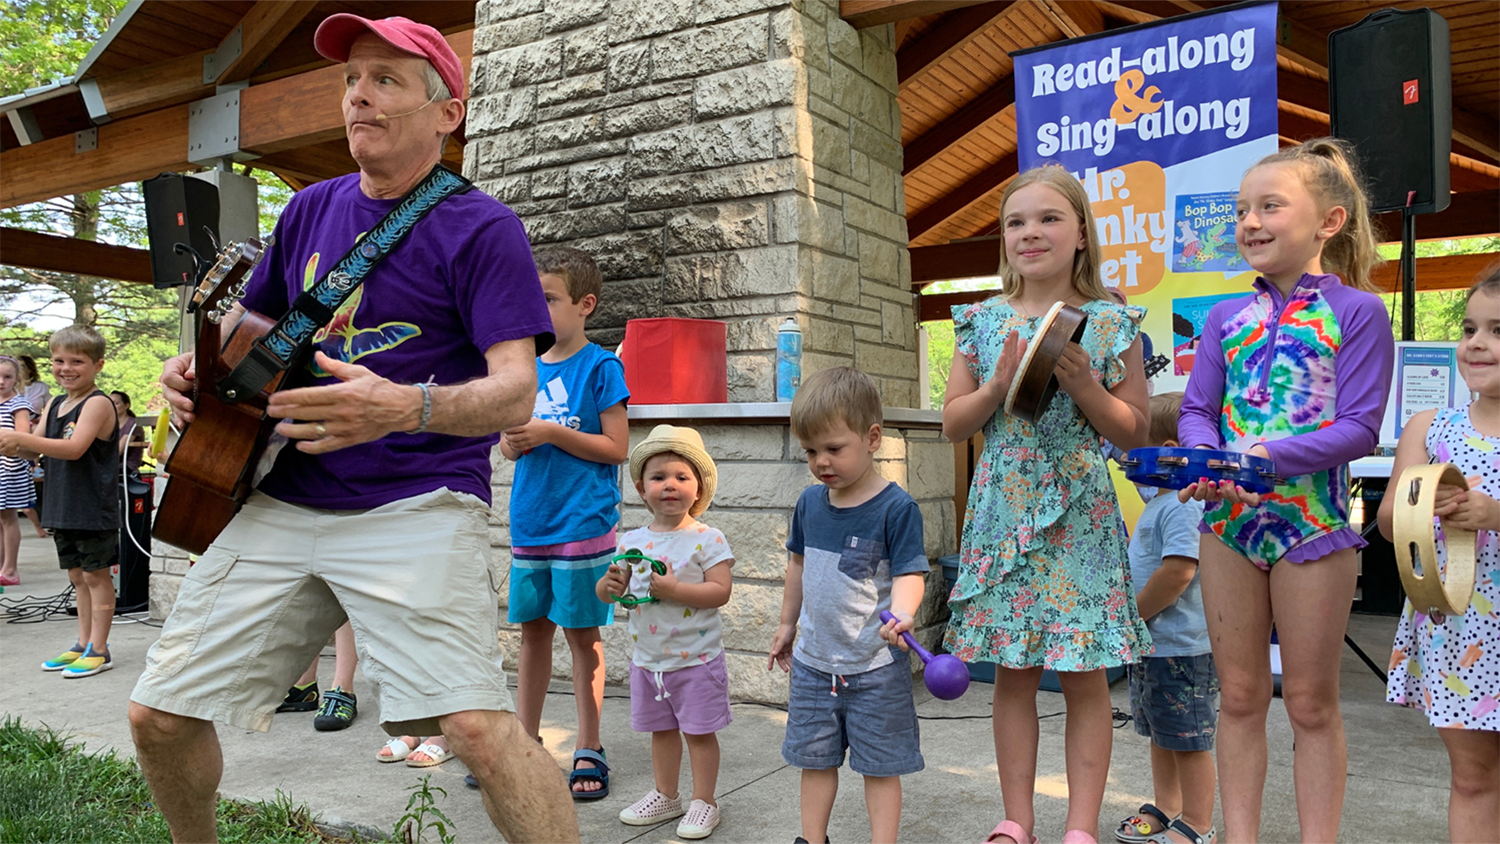 Children's performer, Mr. Stinky Feet, plays guitar while children play musical instruments behind him.